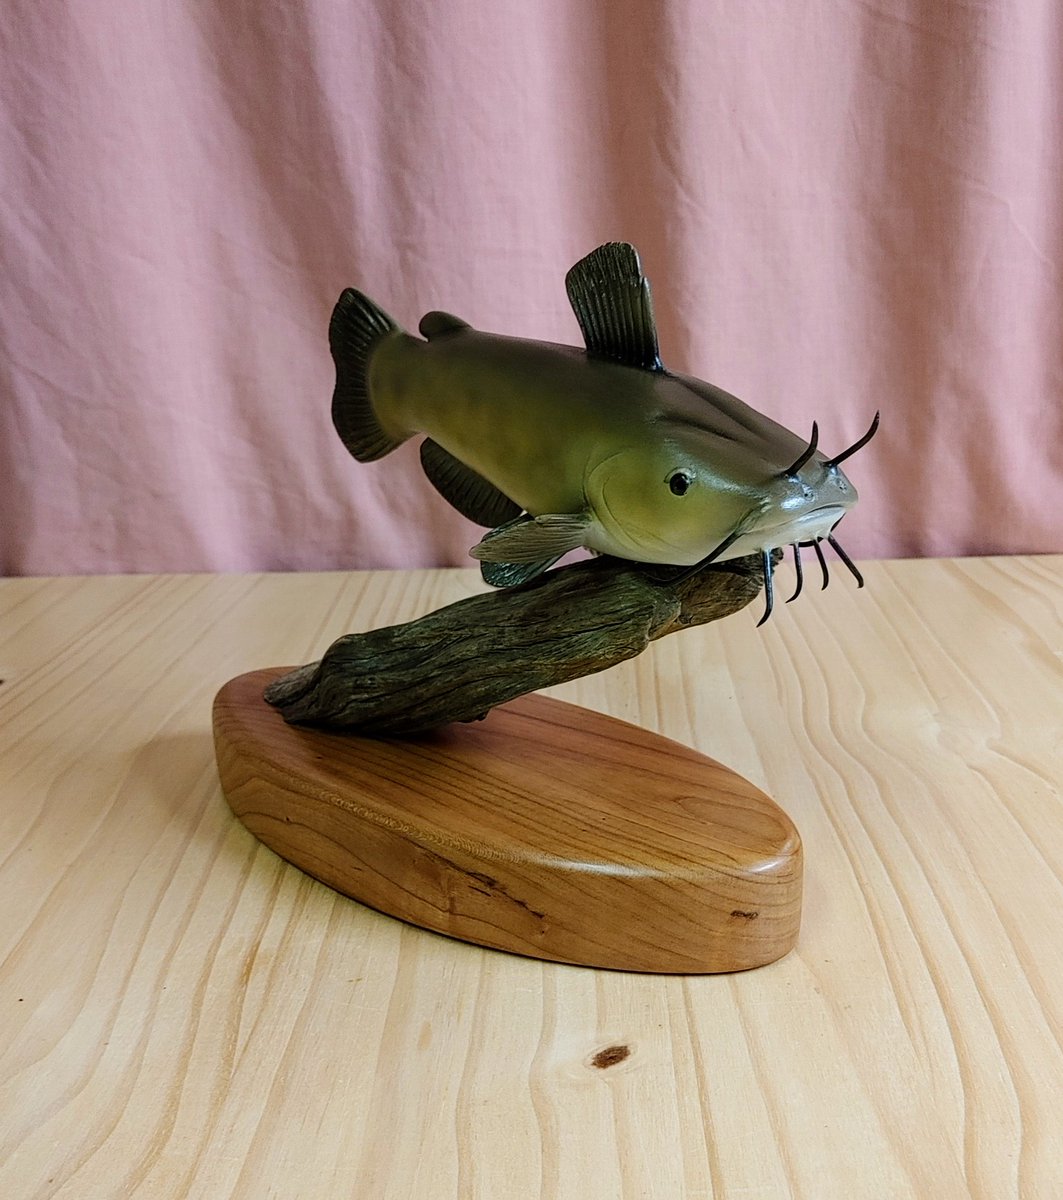 Just finished my carving of a brown bullhead catfish